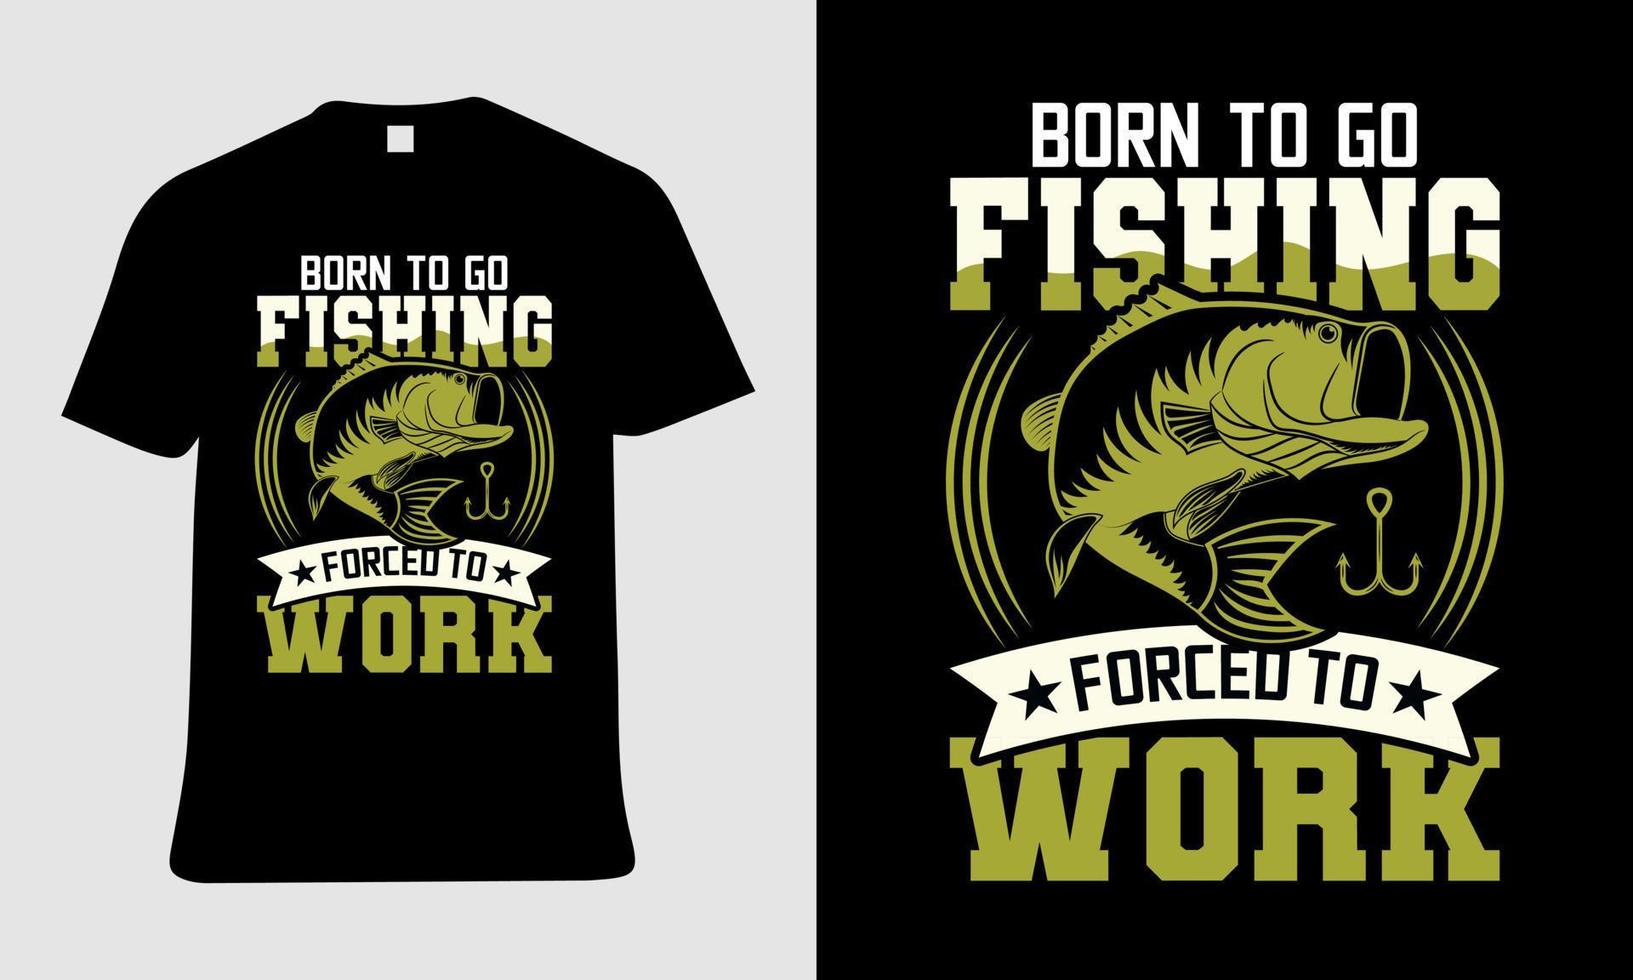 Fishing T-shirt design, with Born to go fishing forced to work text vector